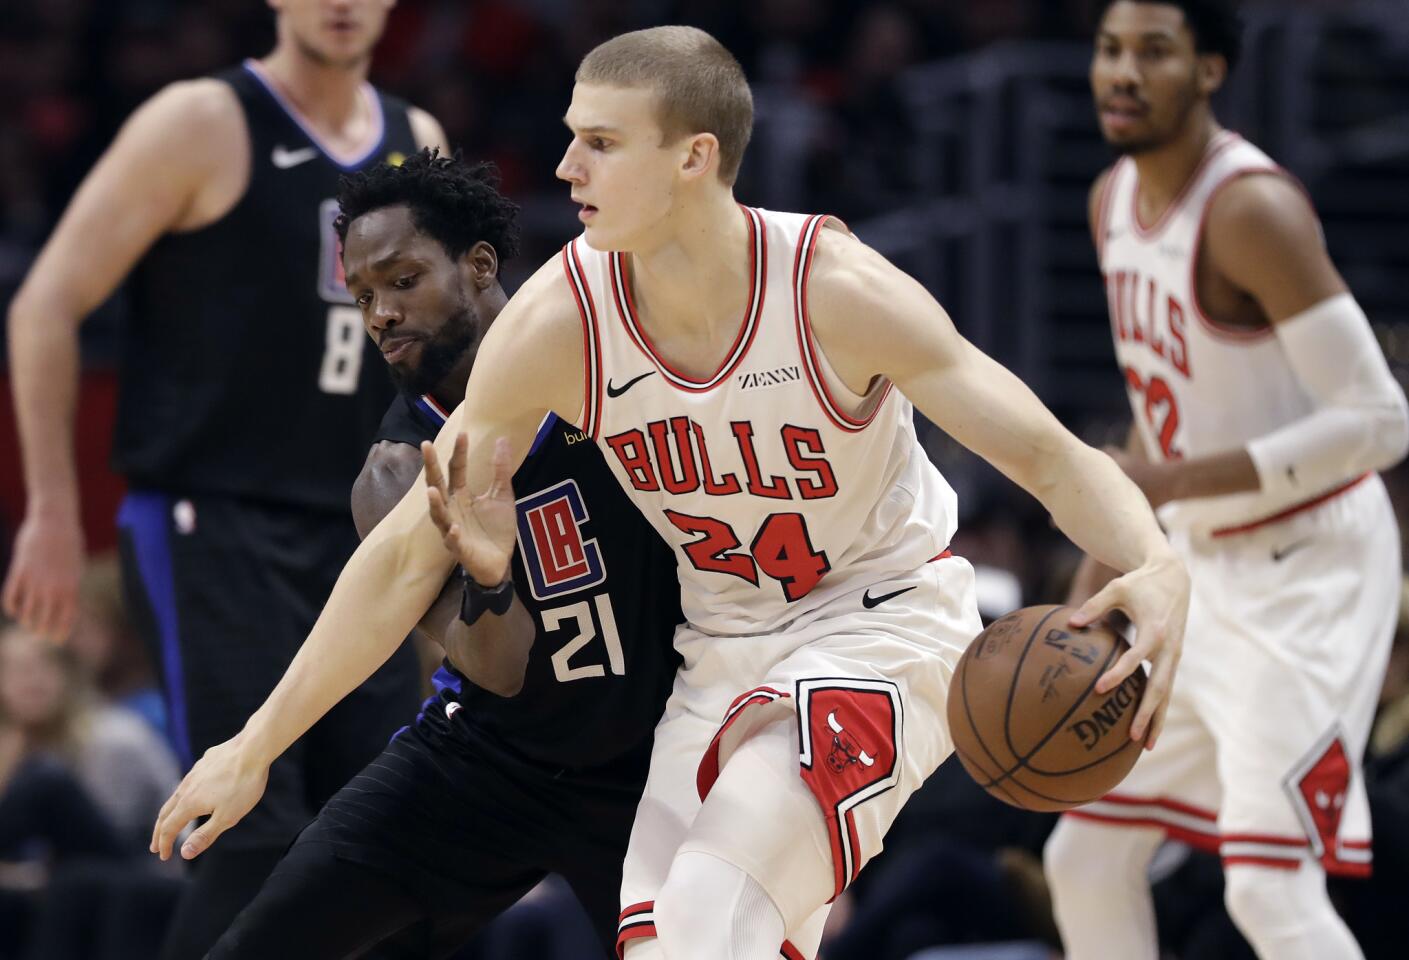 Chicago Bulls' Lauri Markkanen (24) is defended by Los Angeles Clippers' Patrick Beverley (21) during the second half of an NBA basketball game Friday, March 15, 2019, in Los Angeles. (AP Photo/Marcio Jose Sanchez)